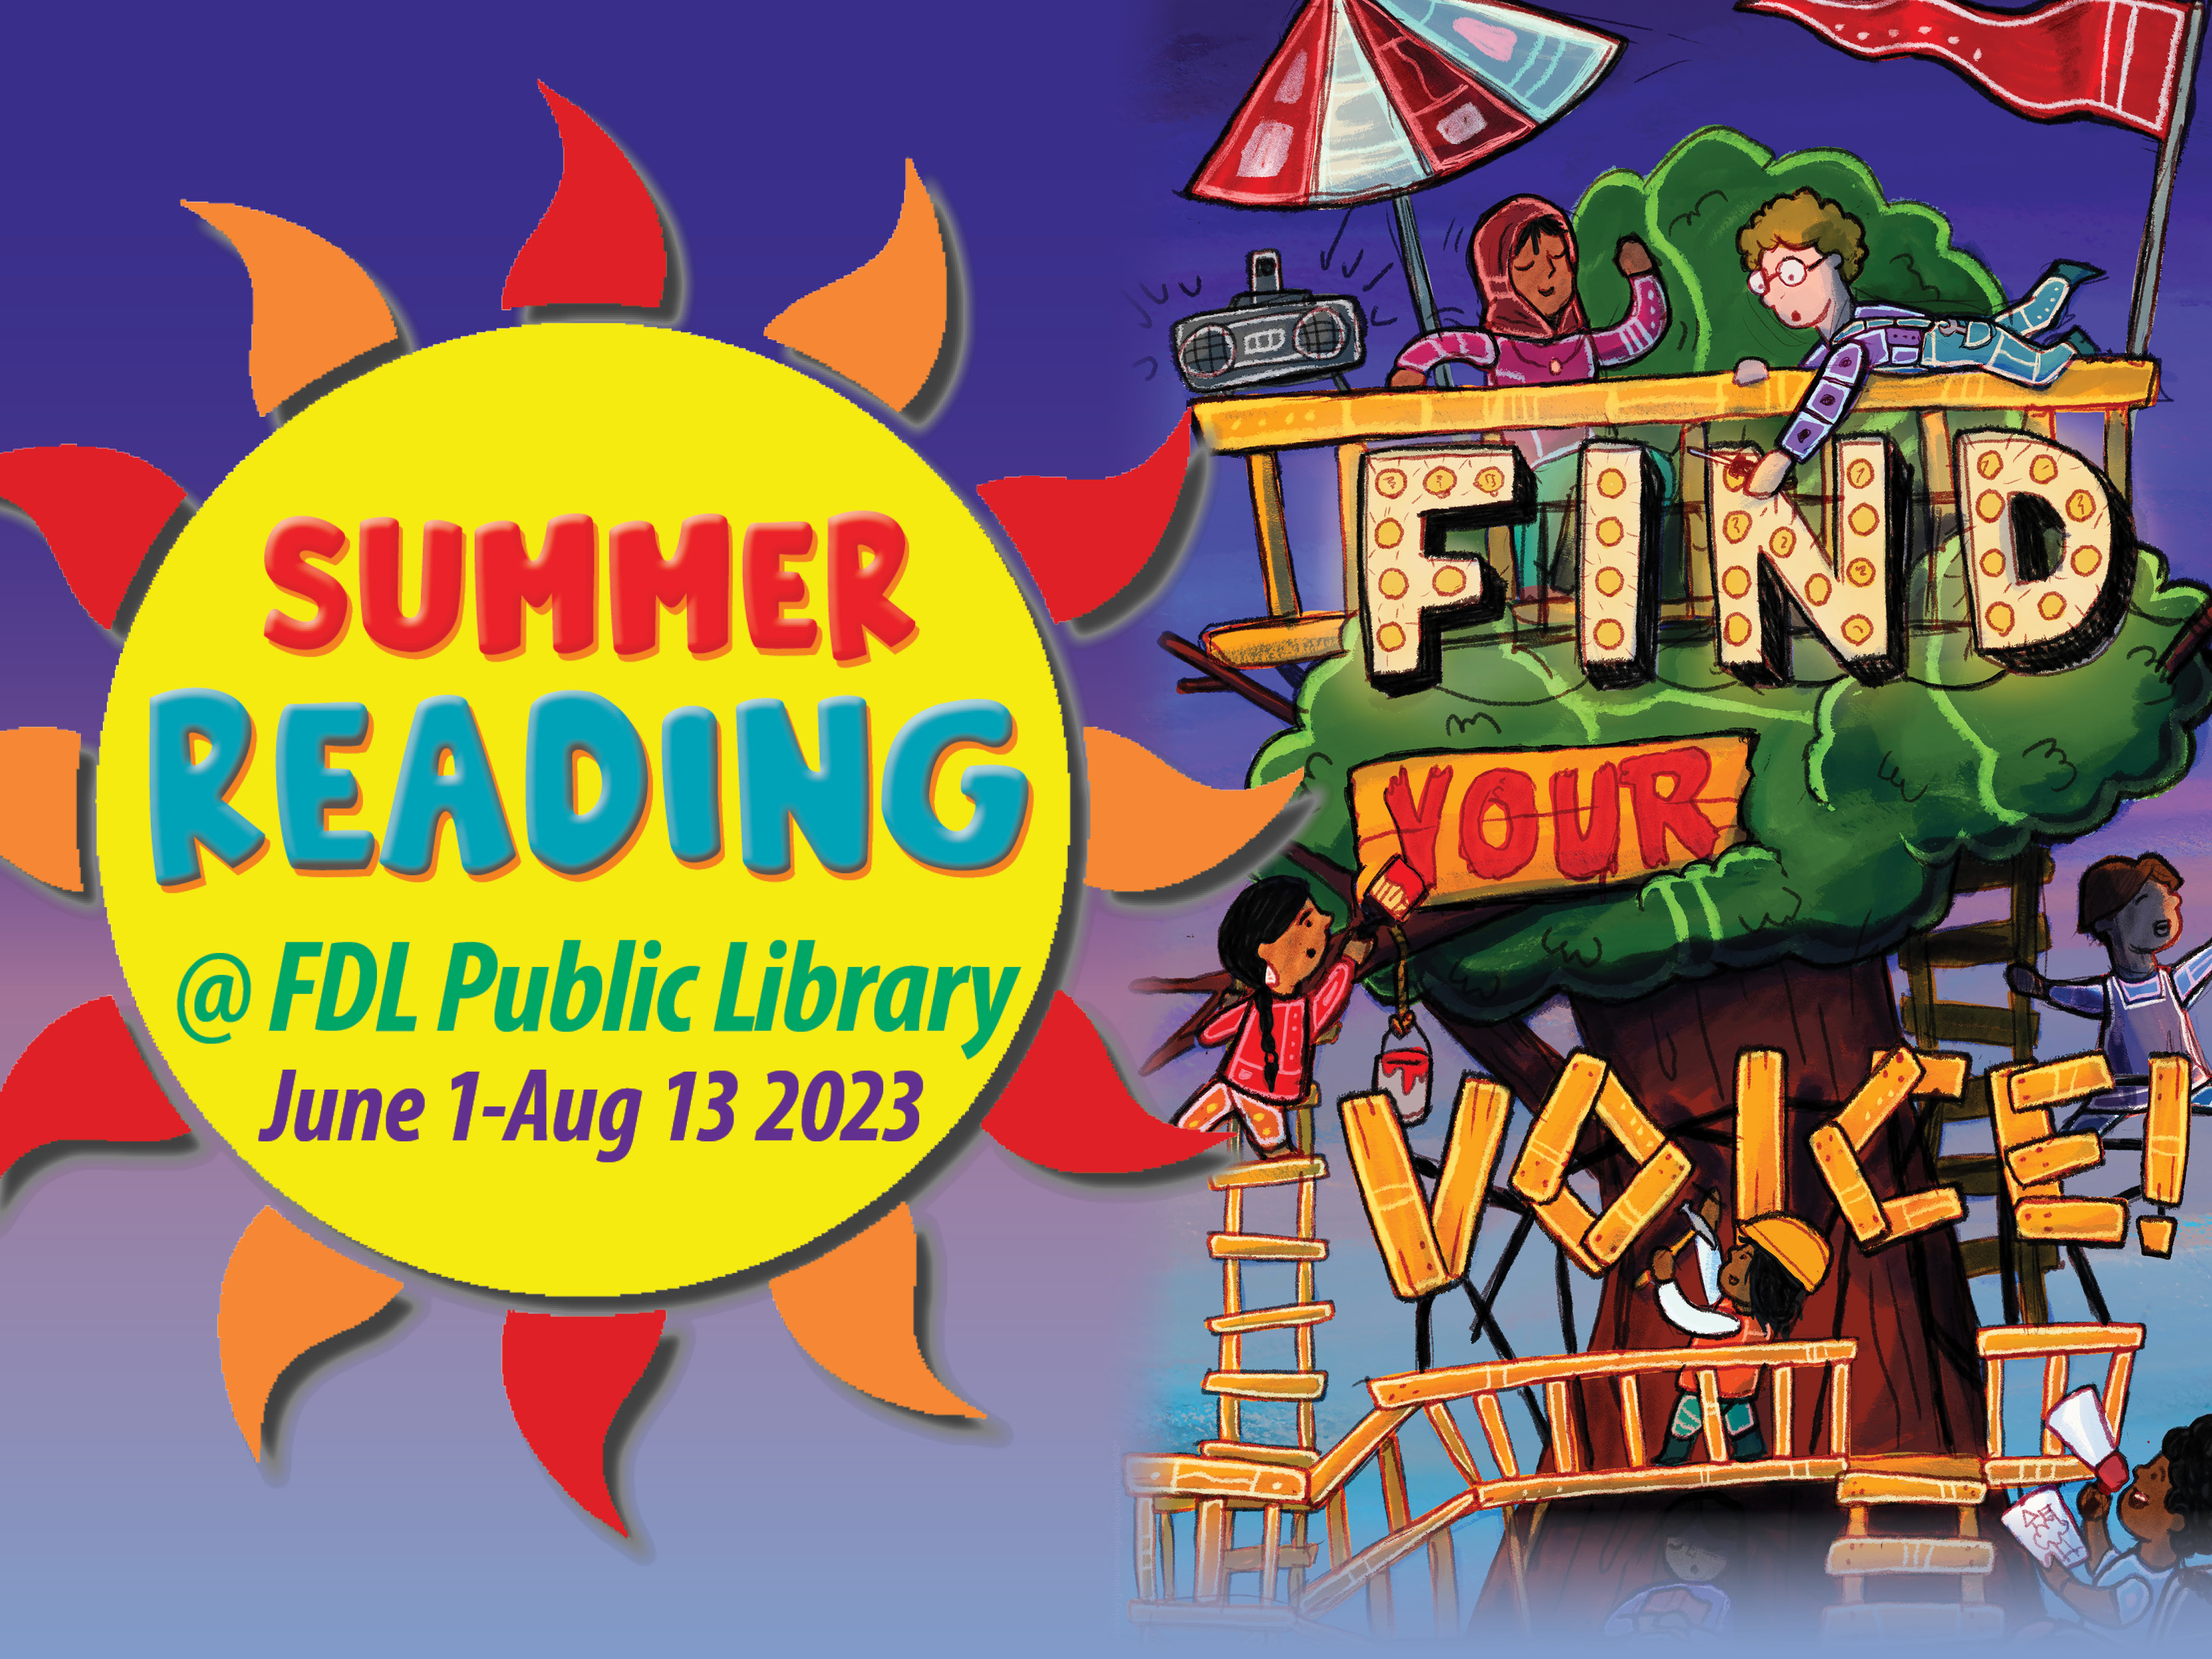 Find Your Voice with the FDL Public Library as Summer Reading continues